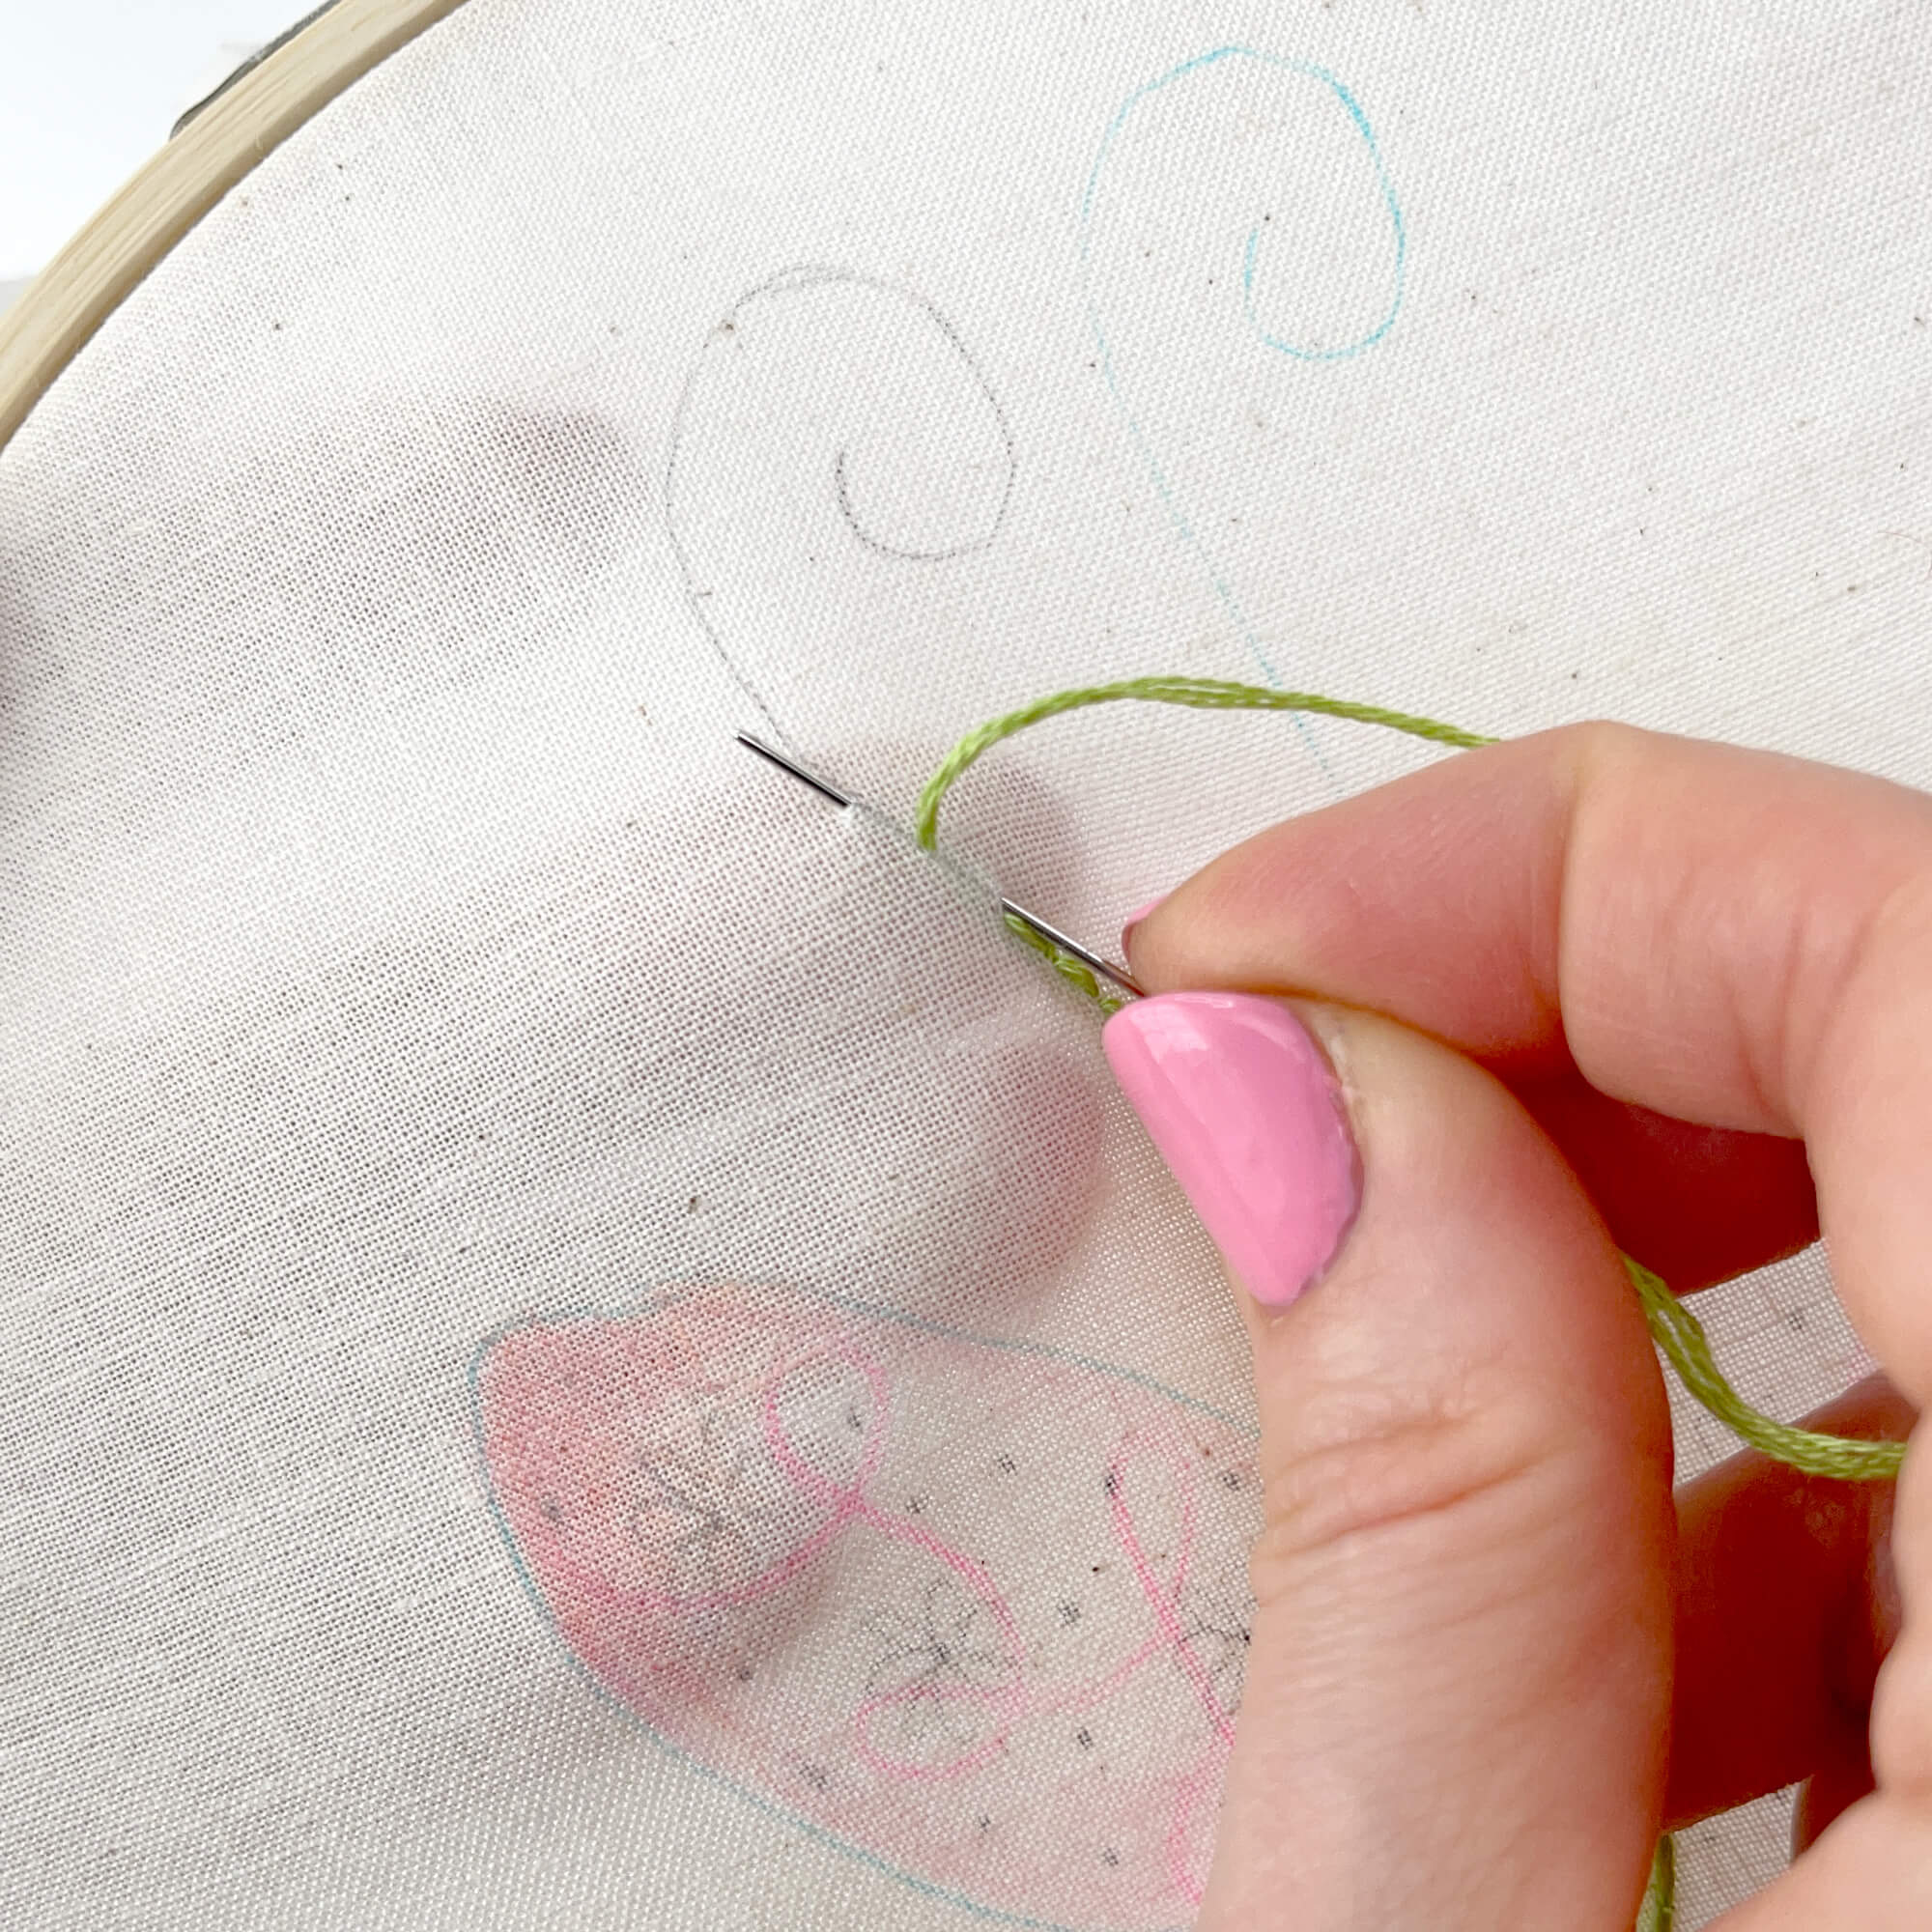 Sewing method for hand embroidery stitching